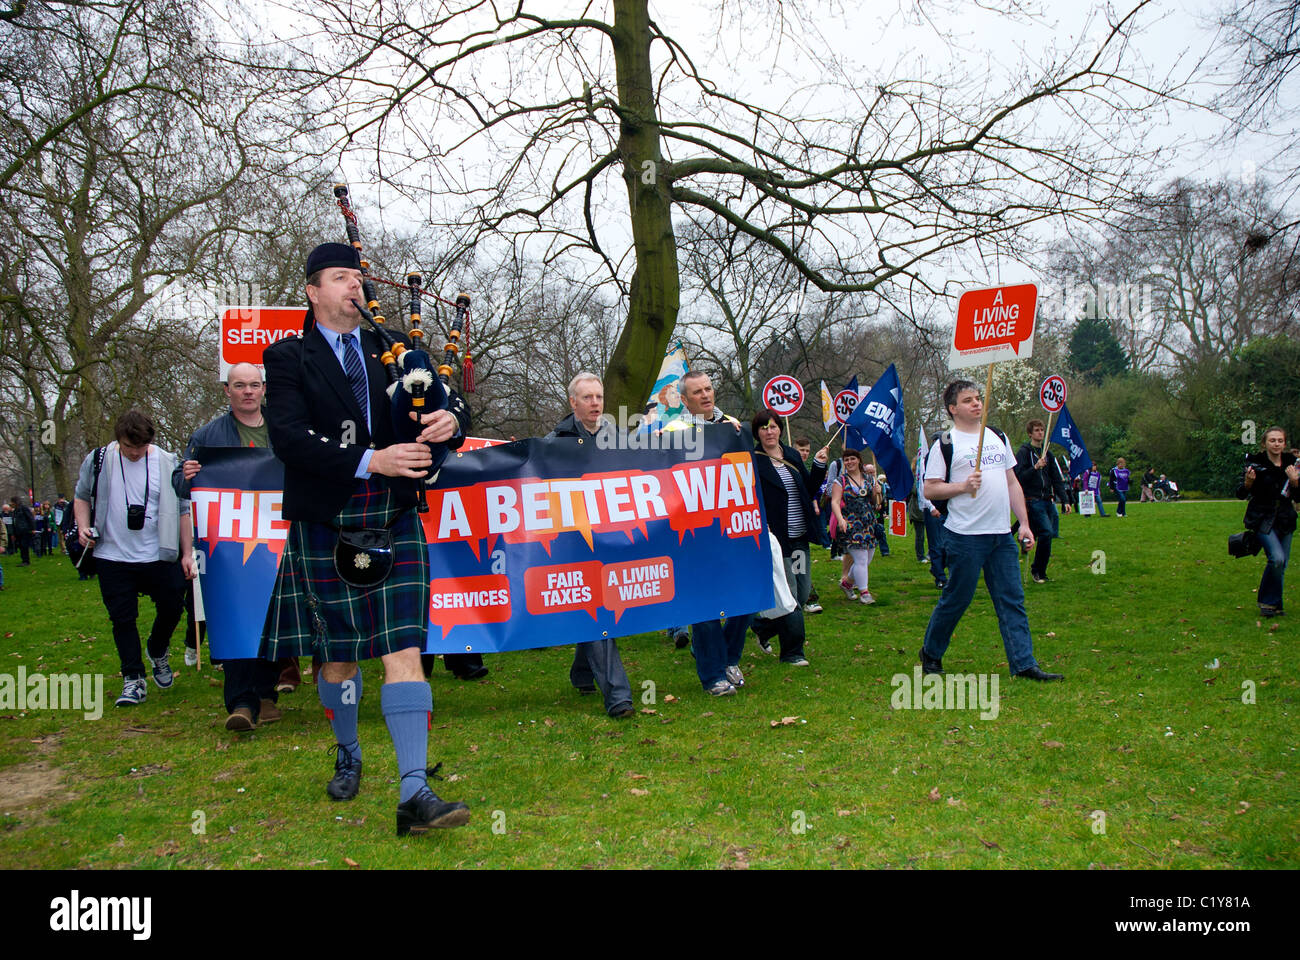 Piper in kilt at March for the Alternative rally organised by the TUC, London, England Stock Photo